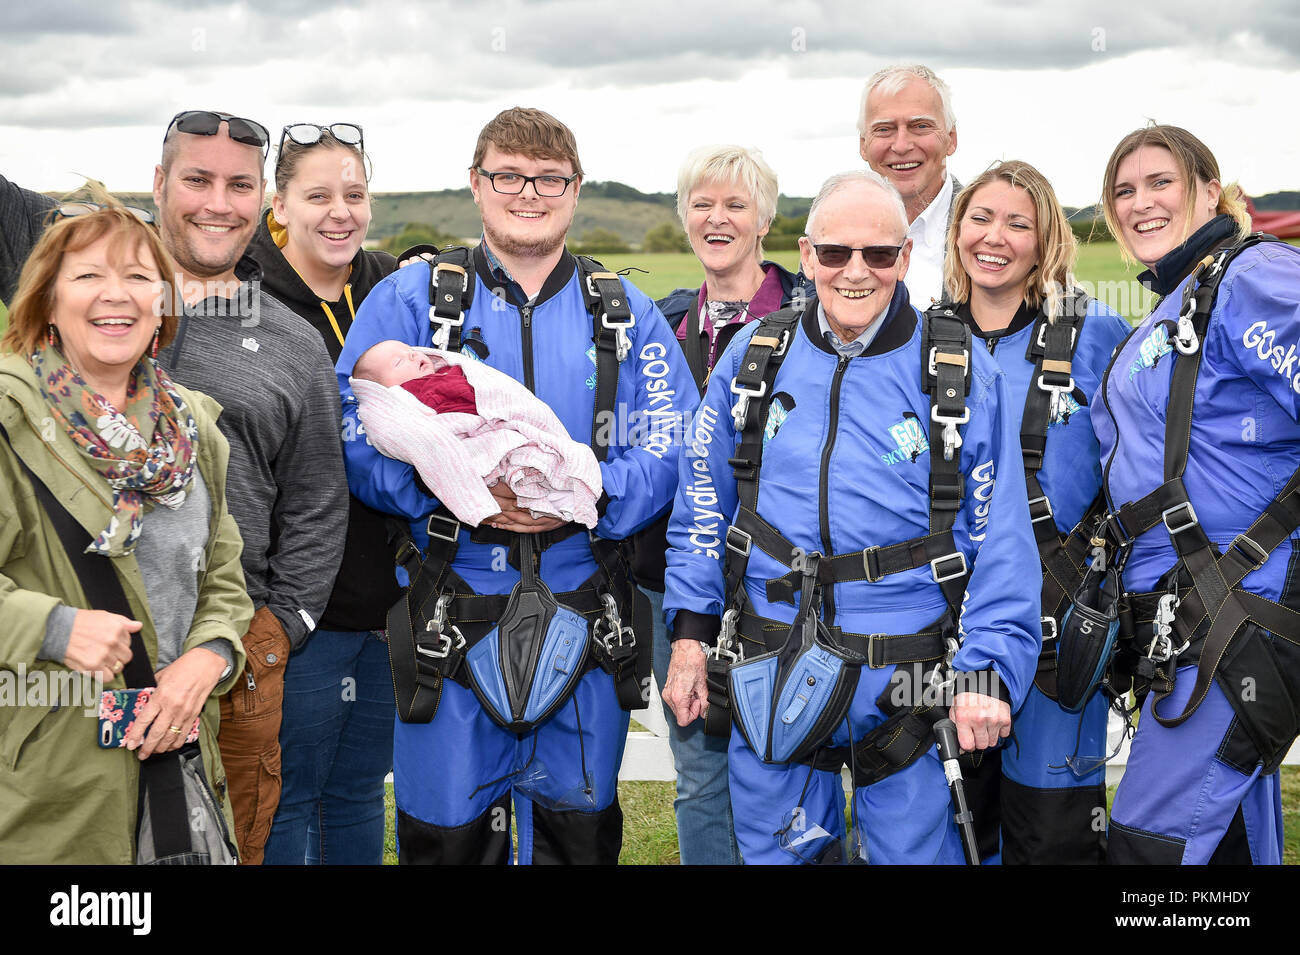 D-Day veteran Harry Read, 94, in his jump-suit with his family (left to right) daughter-in-law Anne Read, 63, grandson-in-law Paul Sealey, 39, great granddaughter-in-law Aimee Shaw, 23, great great granddaughter Isabella Shaw aged three weeks, great grandson Josh Shaw, 23, daughter Margaret Ord, 63, son John Read, 67, granddaughter Jo Taylor, 38, and granddaughter Lianne Sealey, 36, at Old Sarum Airfield, Salisbury, Wiltshire, where he is taking part in his first high level skydive since he parachuted into Normandy on 6 June 1944. Stock Photo